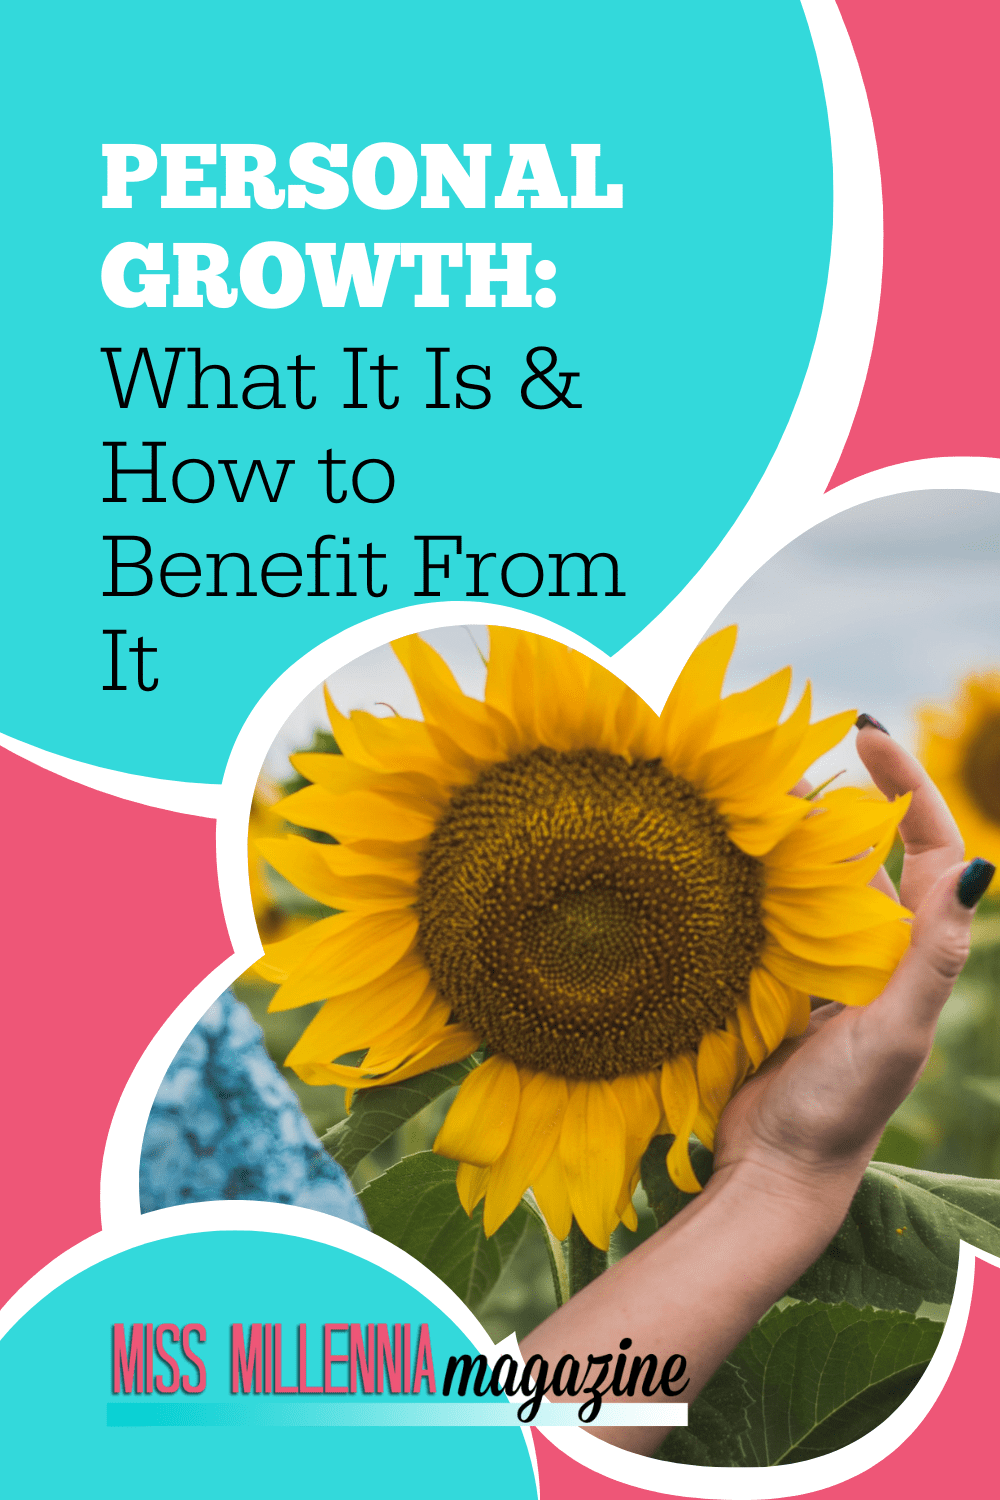 Personal Growth: What It Is & How to Benefit From It